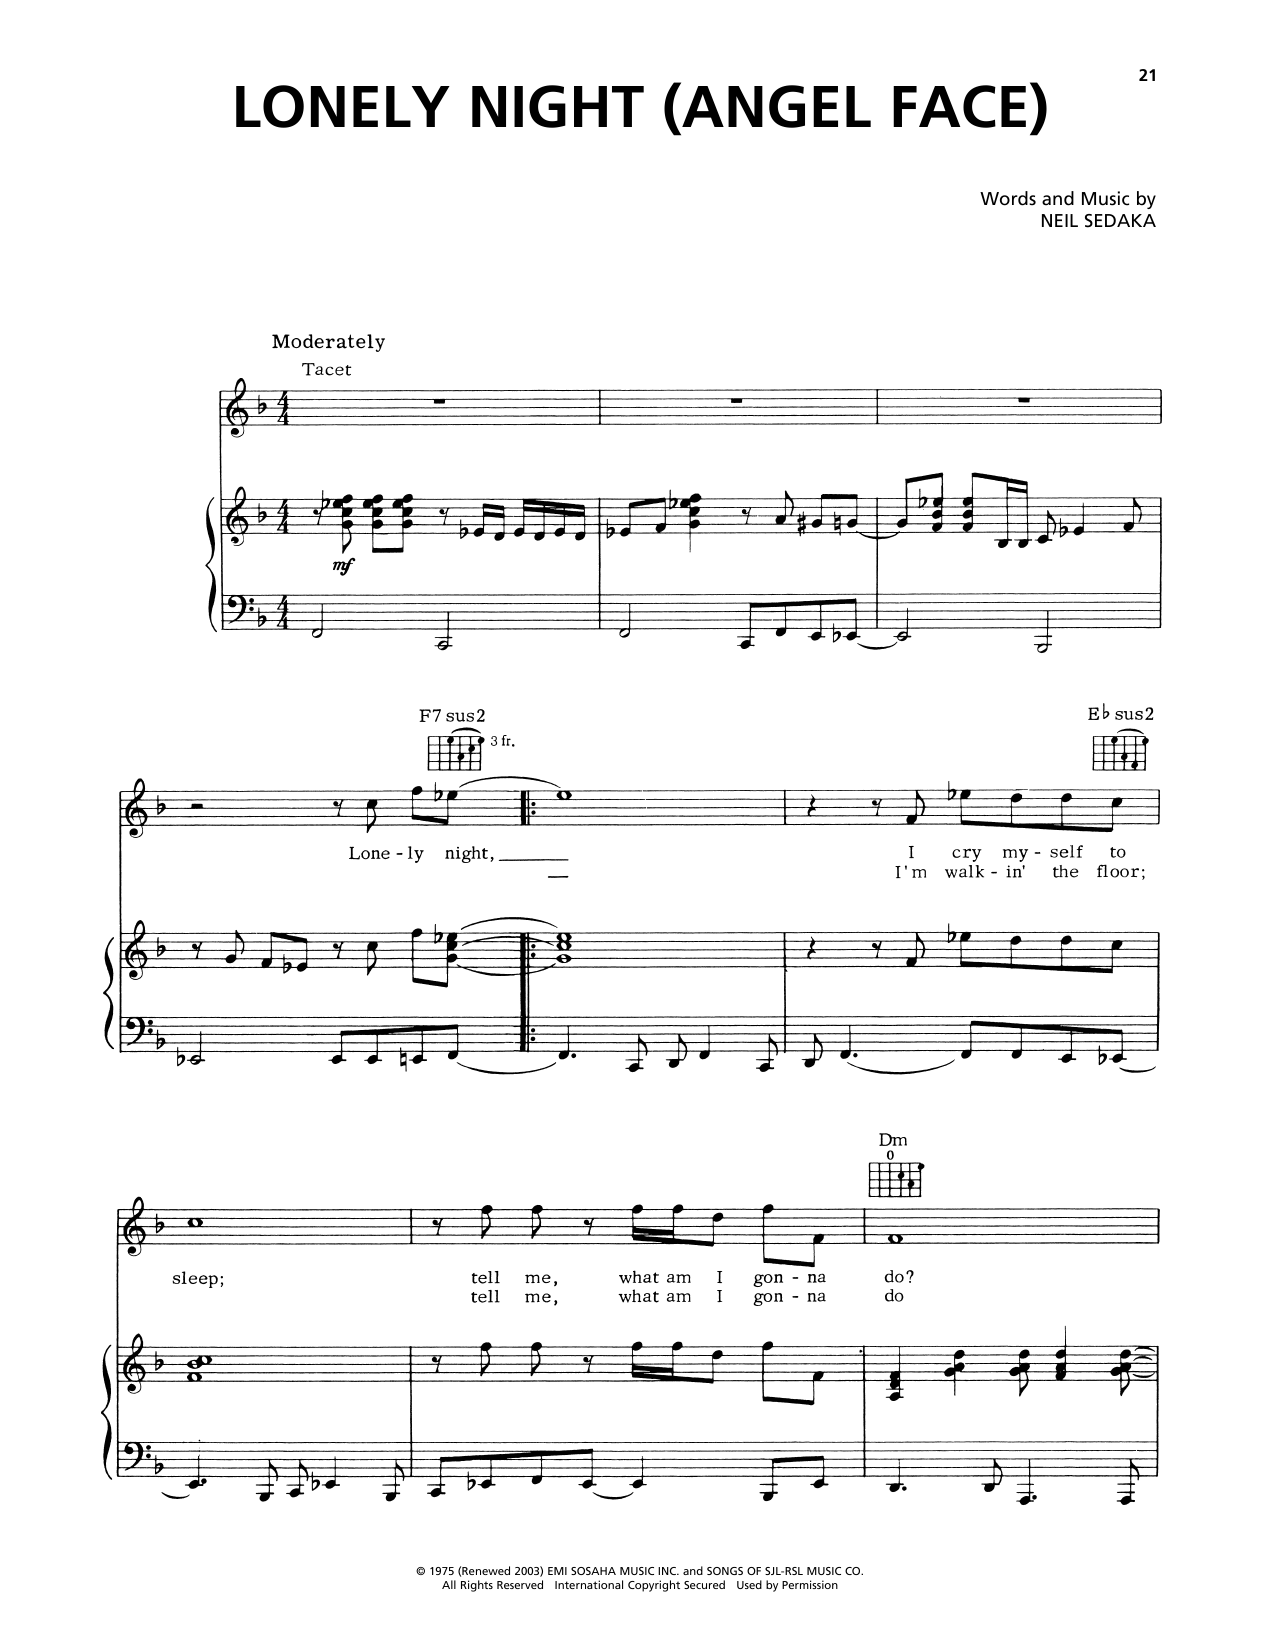 Download Captain & Tennille Lonely Night (Angel Face) Sheet Music